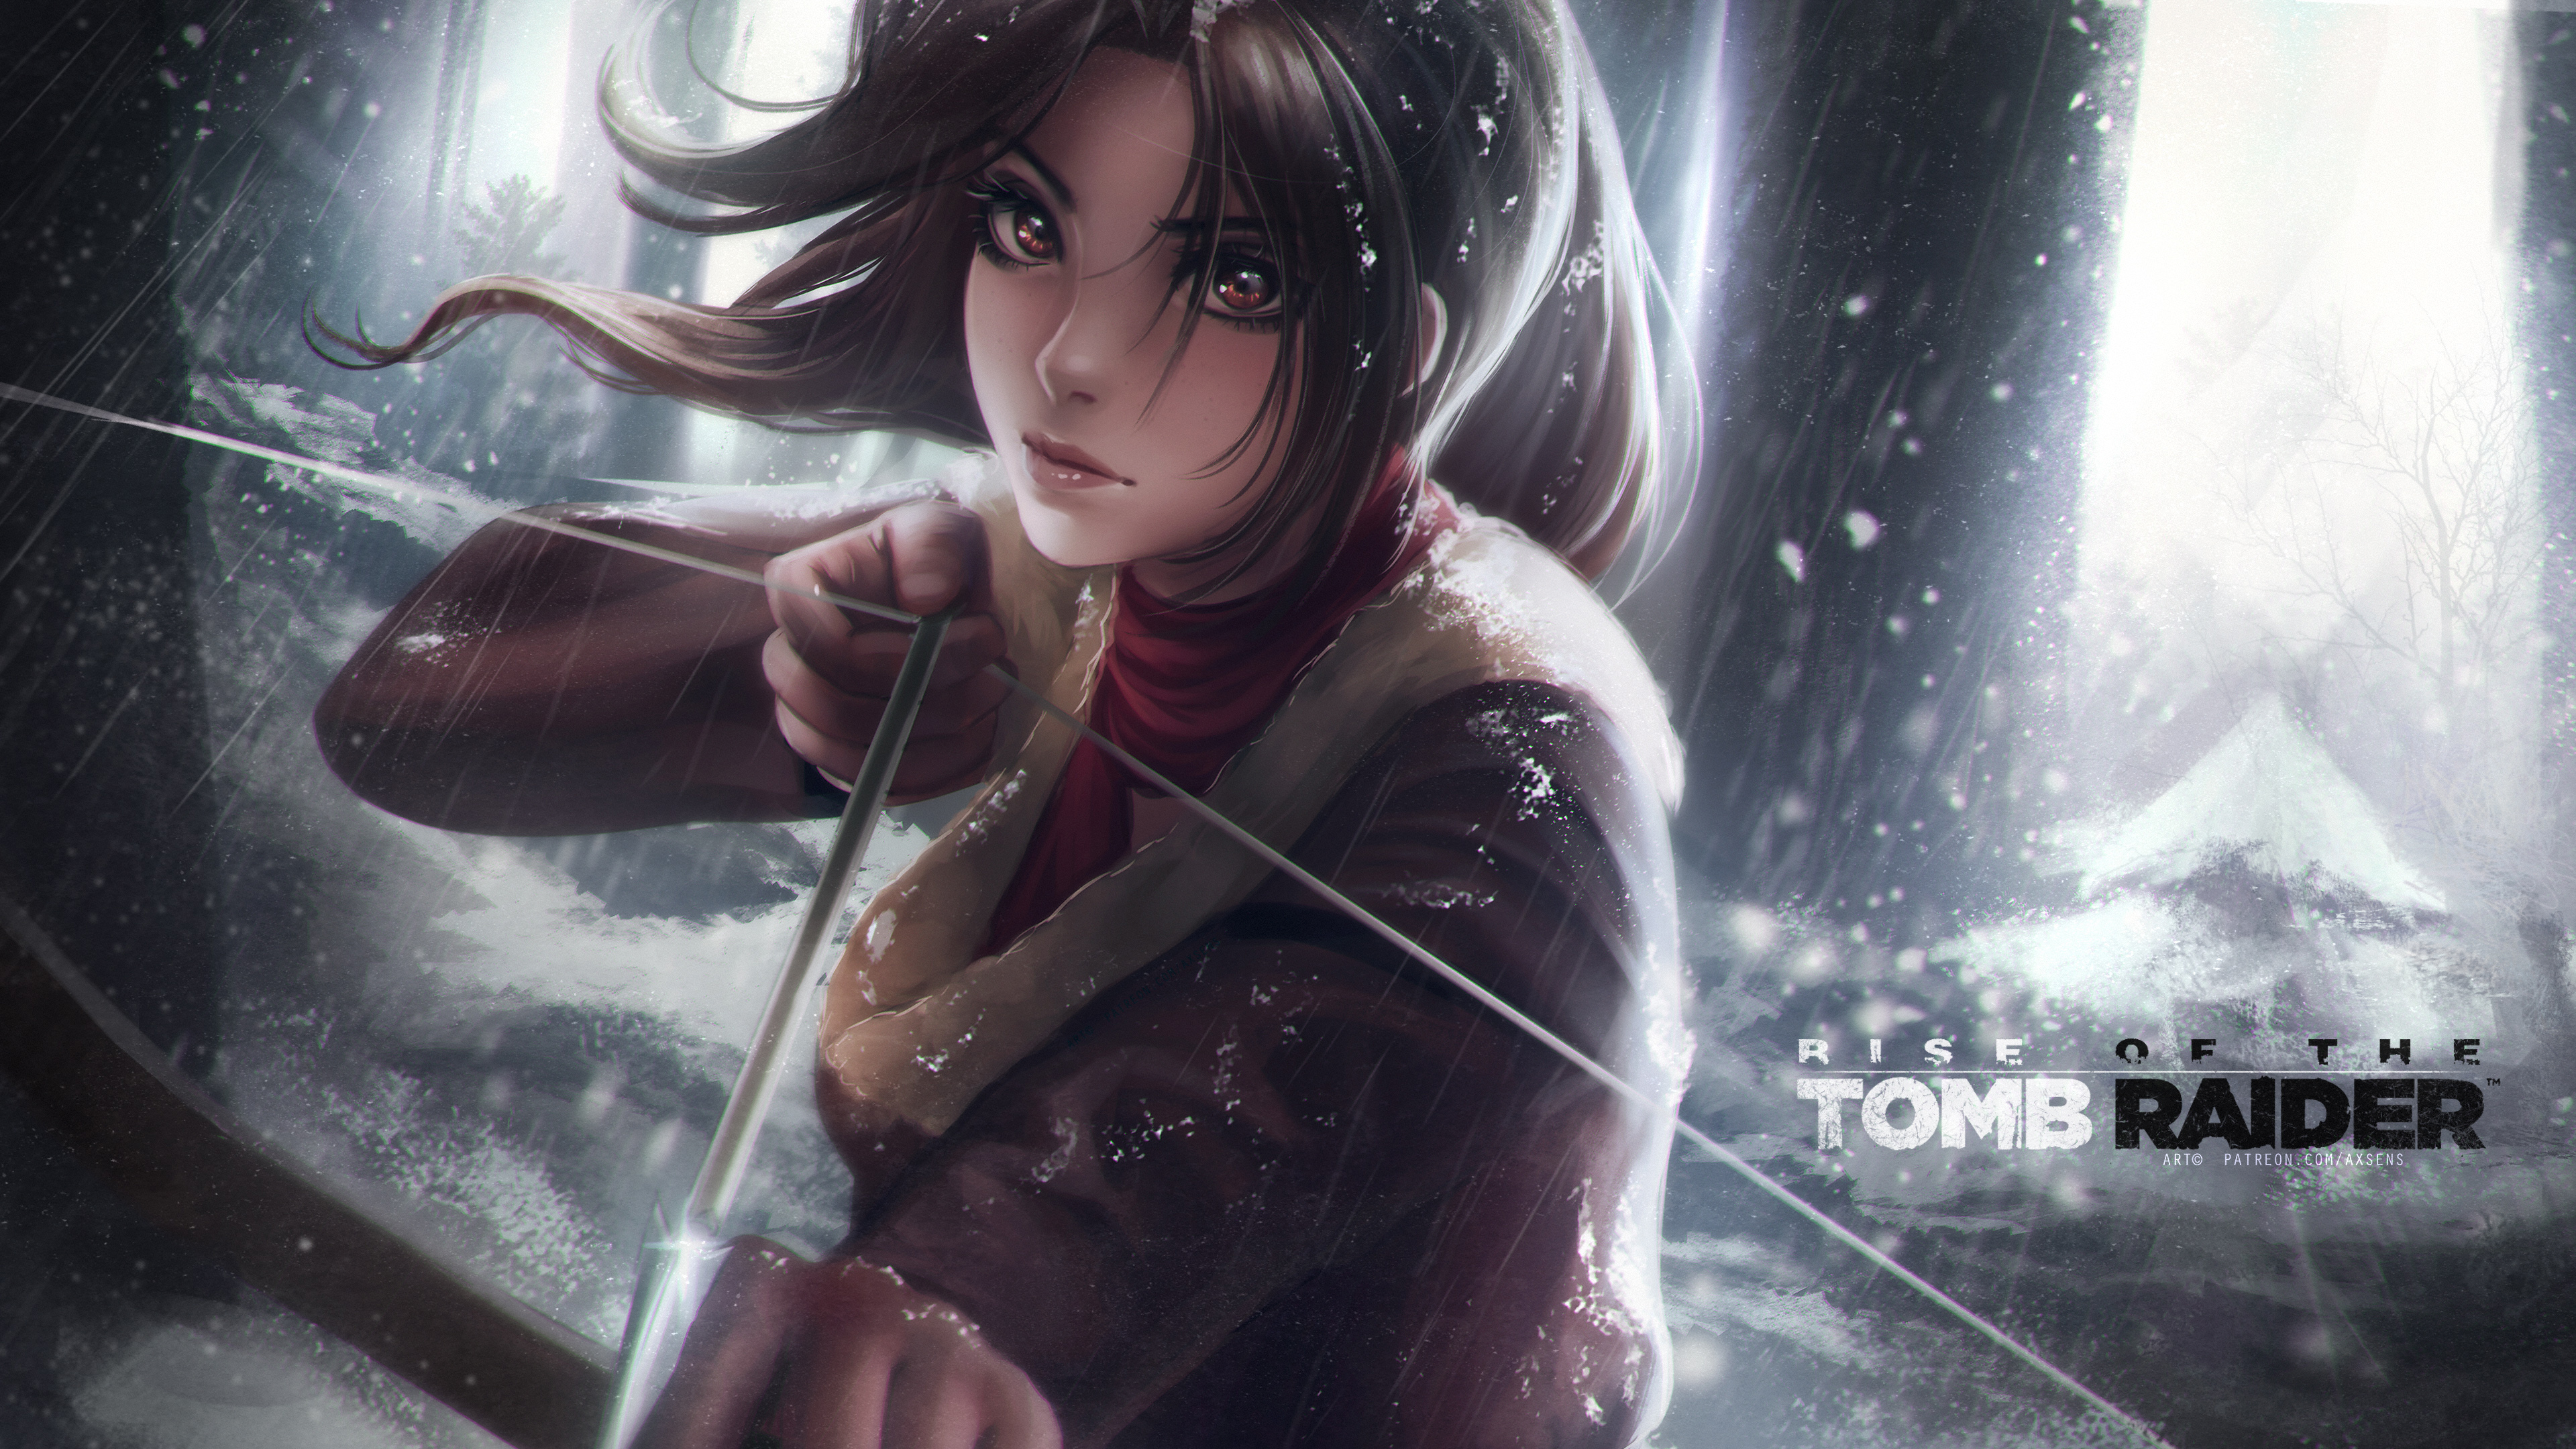 General 3840x2160 Axsens women Lara Croft (Tomb Raider) Tomb Raider bow video game characters digital art watermarked text caption rain bow and arrow arrows looking at viewer brunette brown eyes backlighting